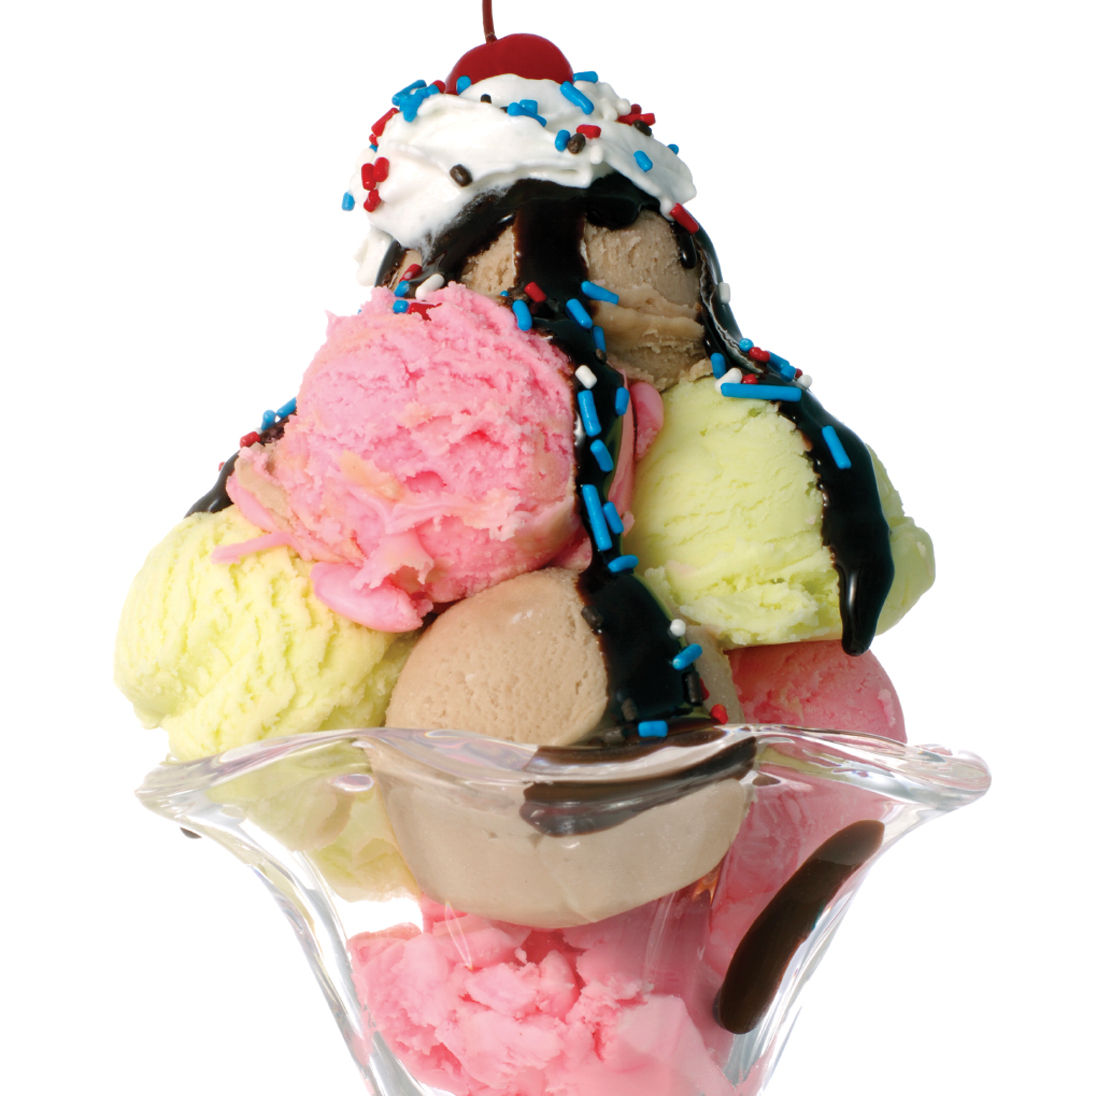 Ice Cream Flavors and Personality Traits - Baskin-Robbins Flavor